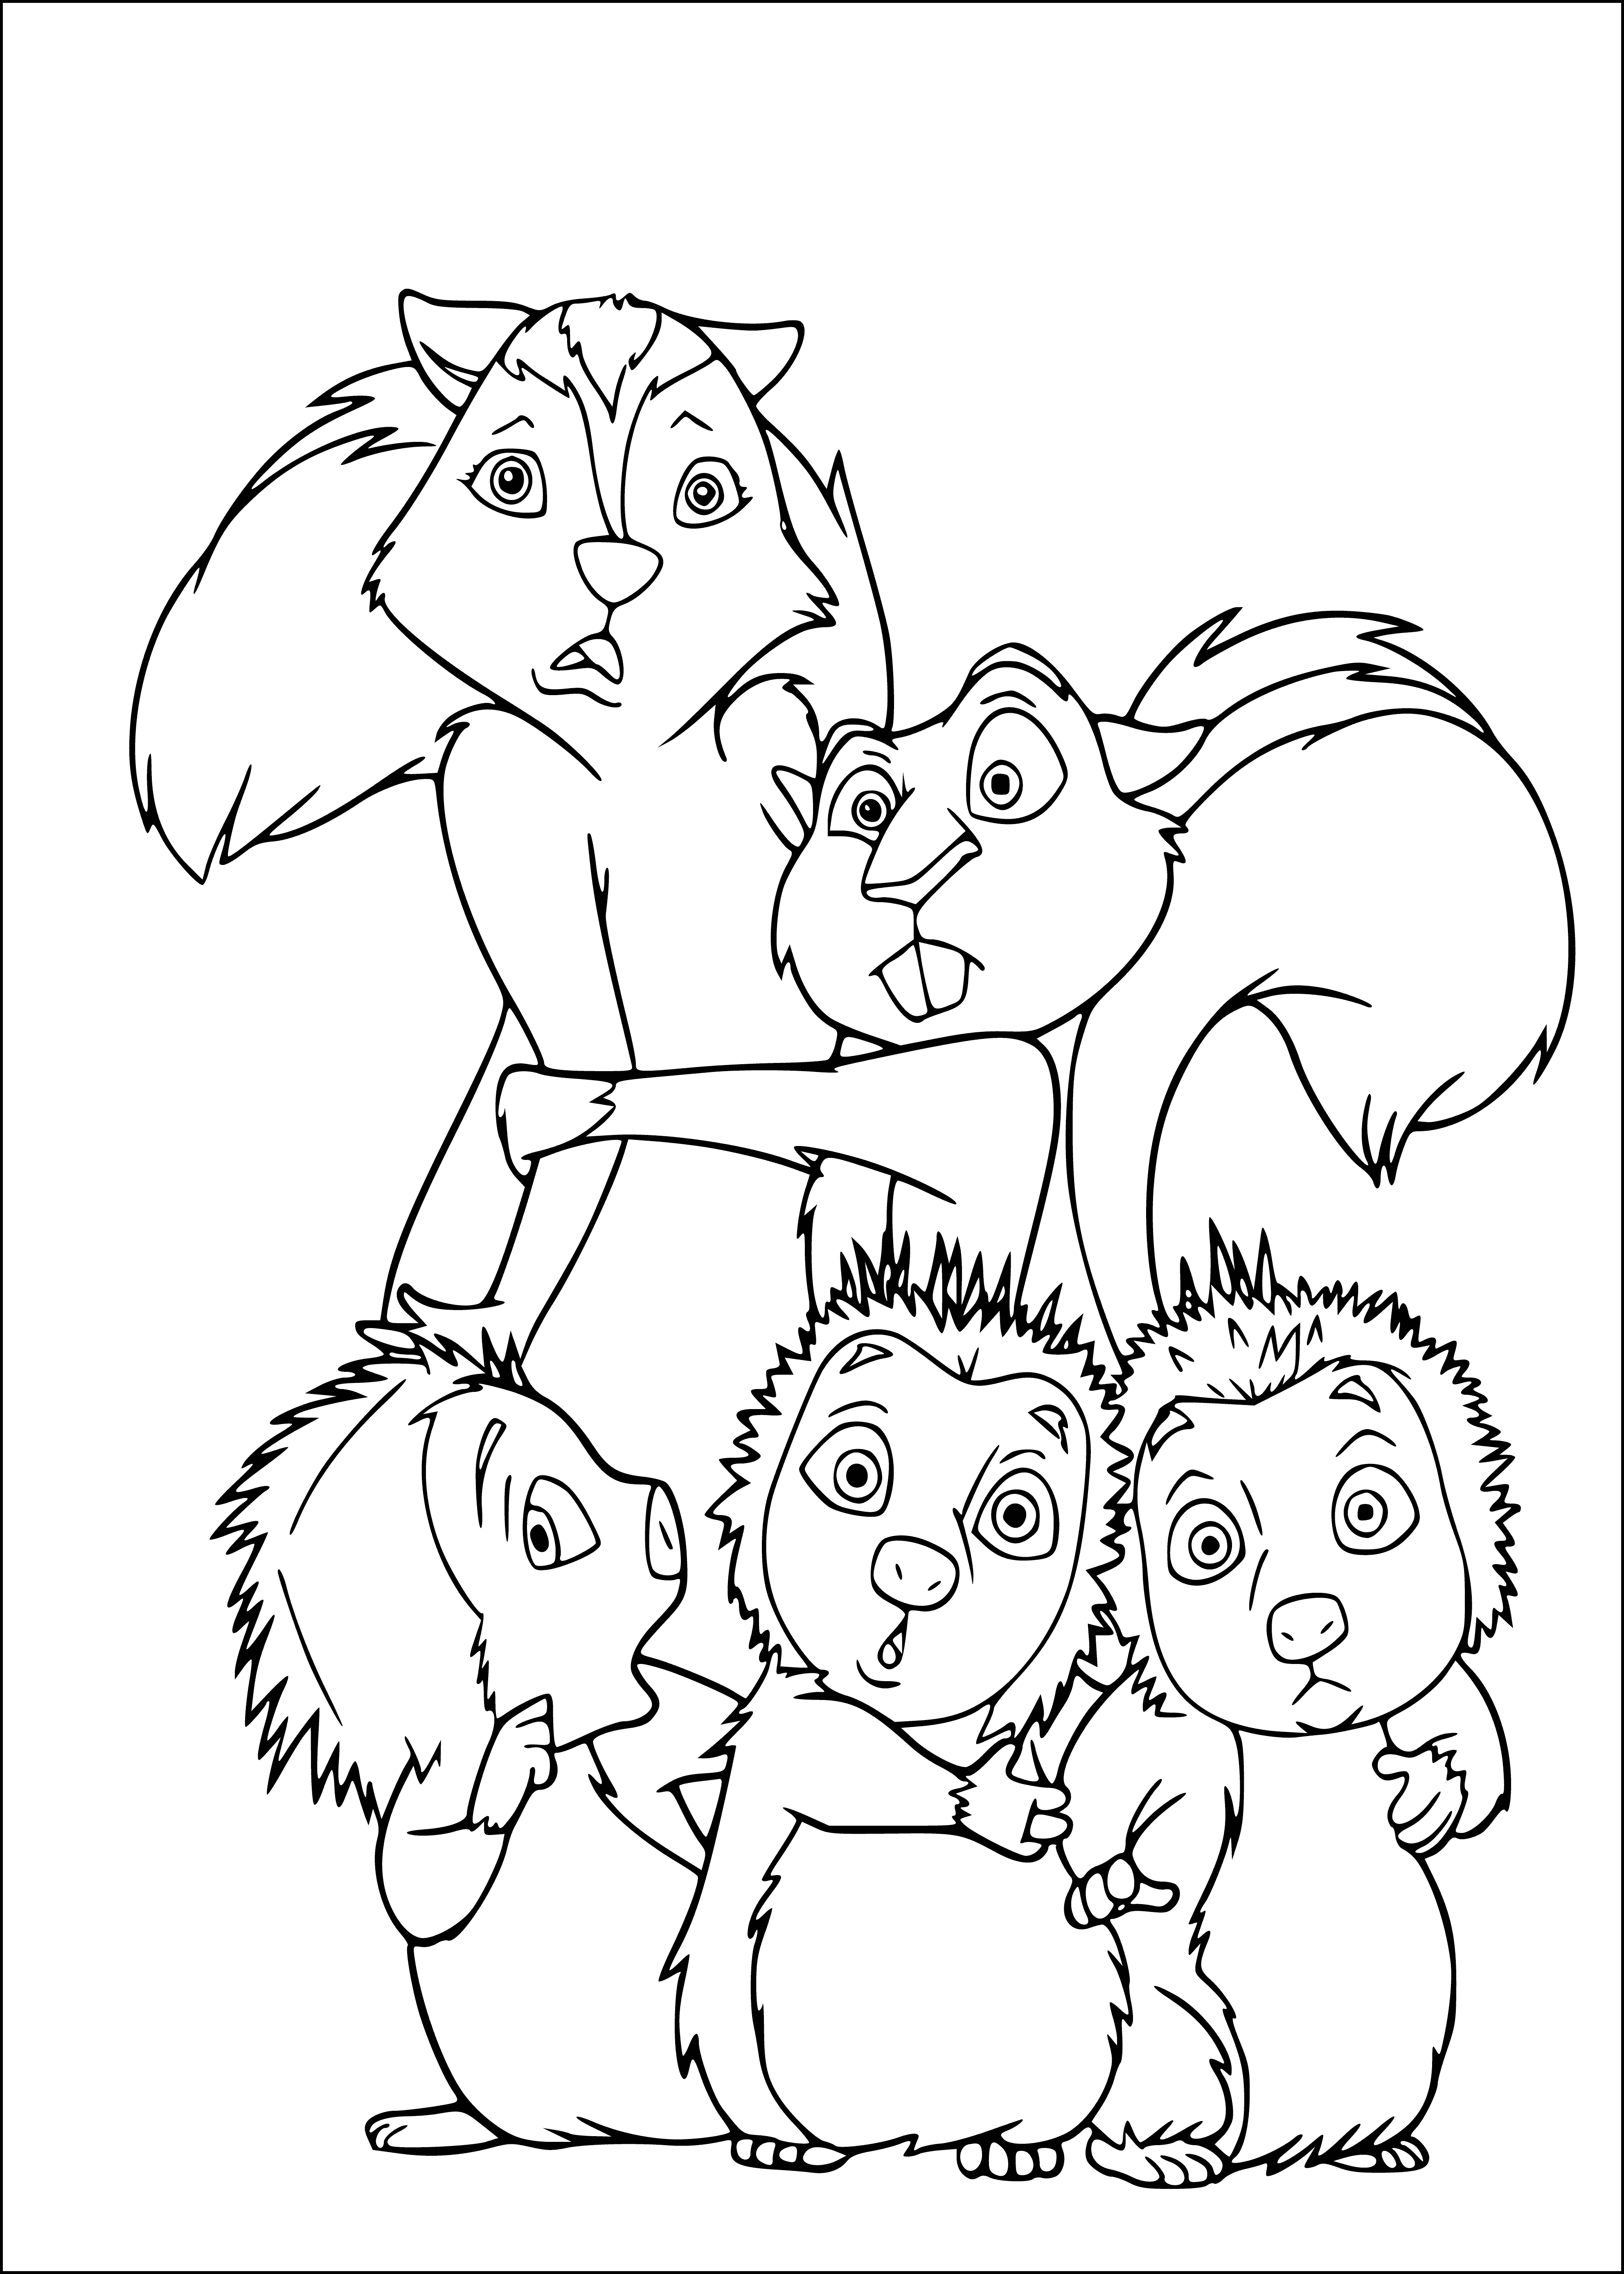 coloring page: Beautiful coloring page of a skunk, squirrel, & 3 porcupines in various poses, with tails & quills in the air.